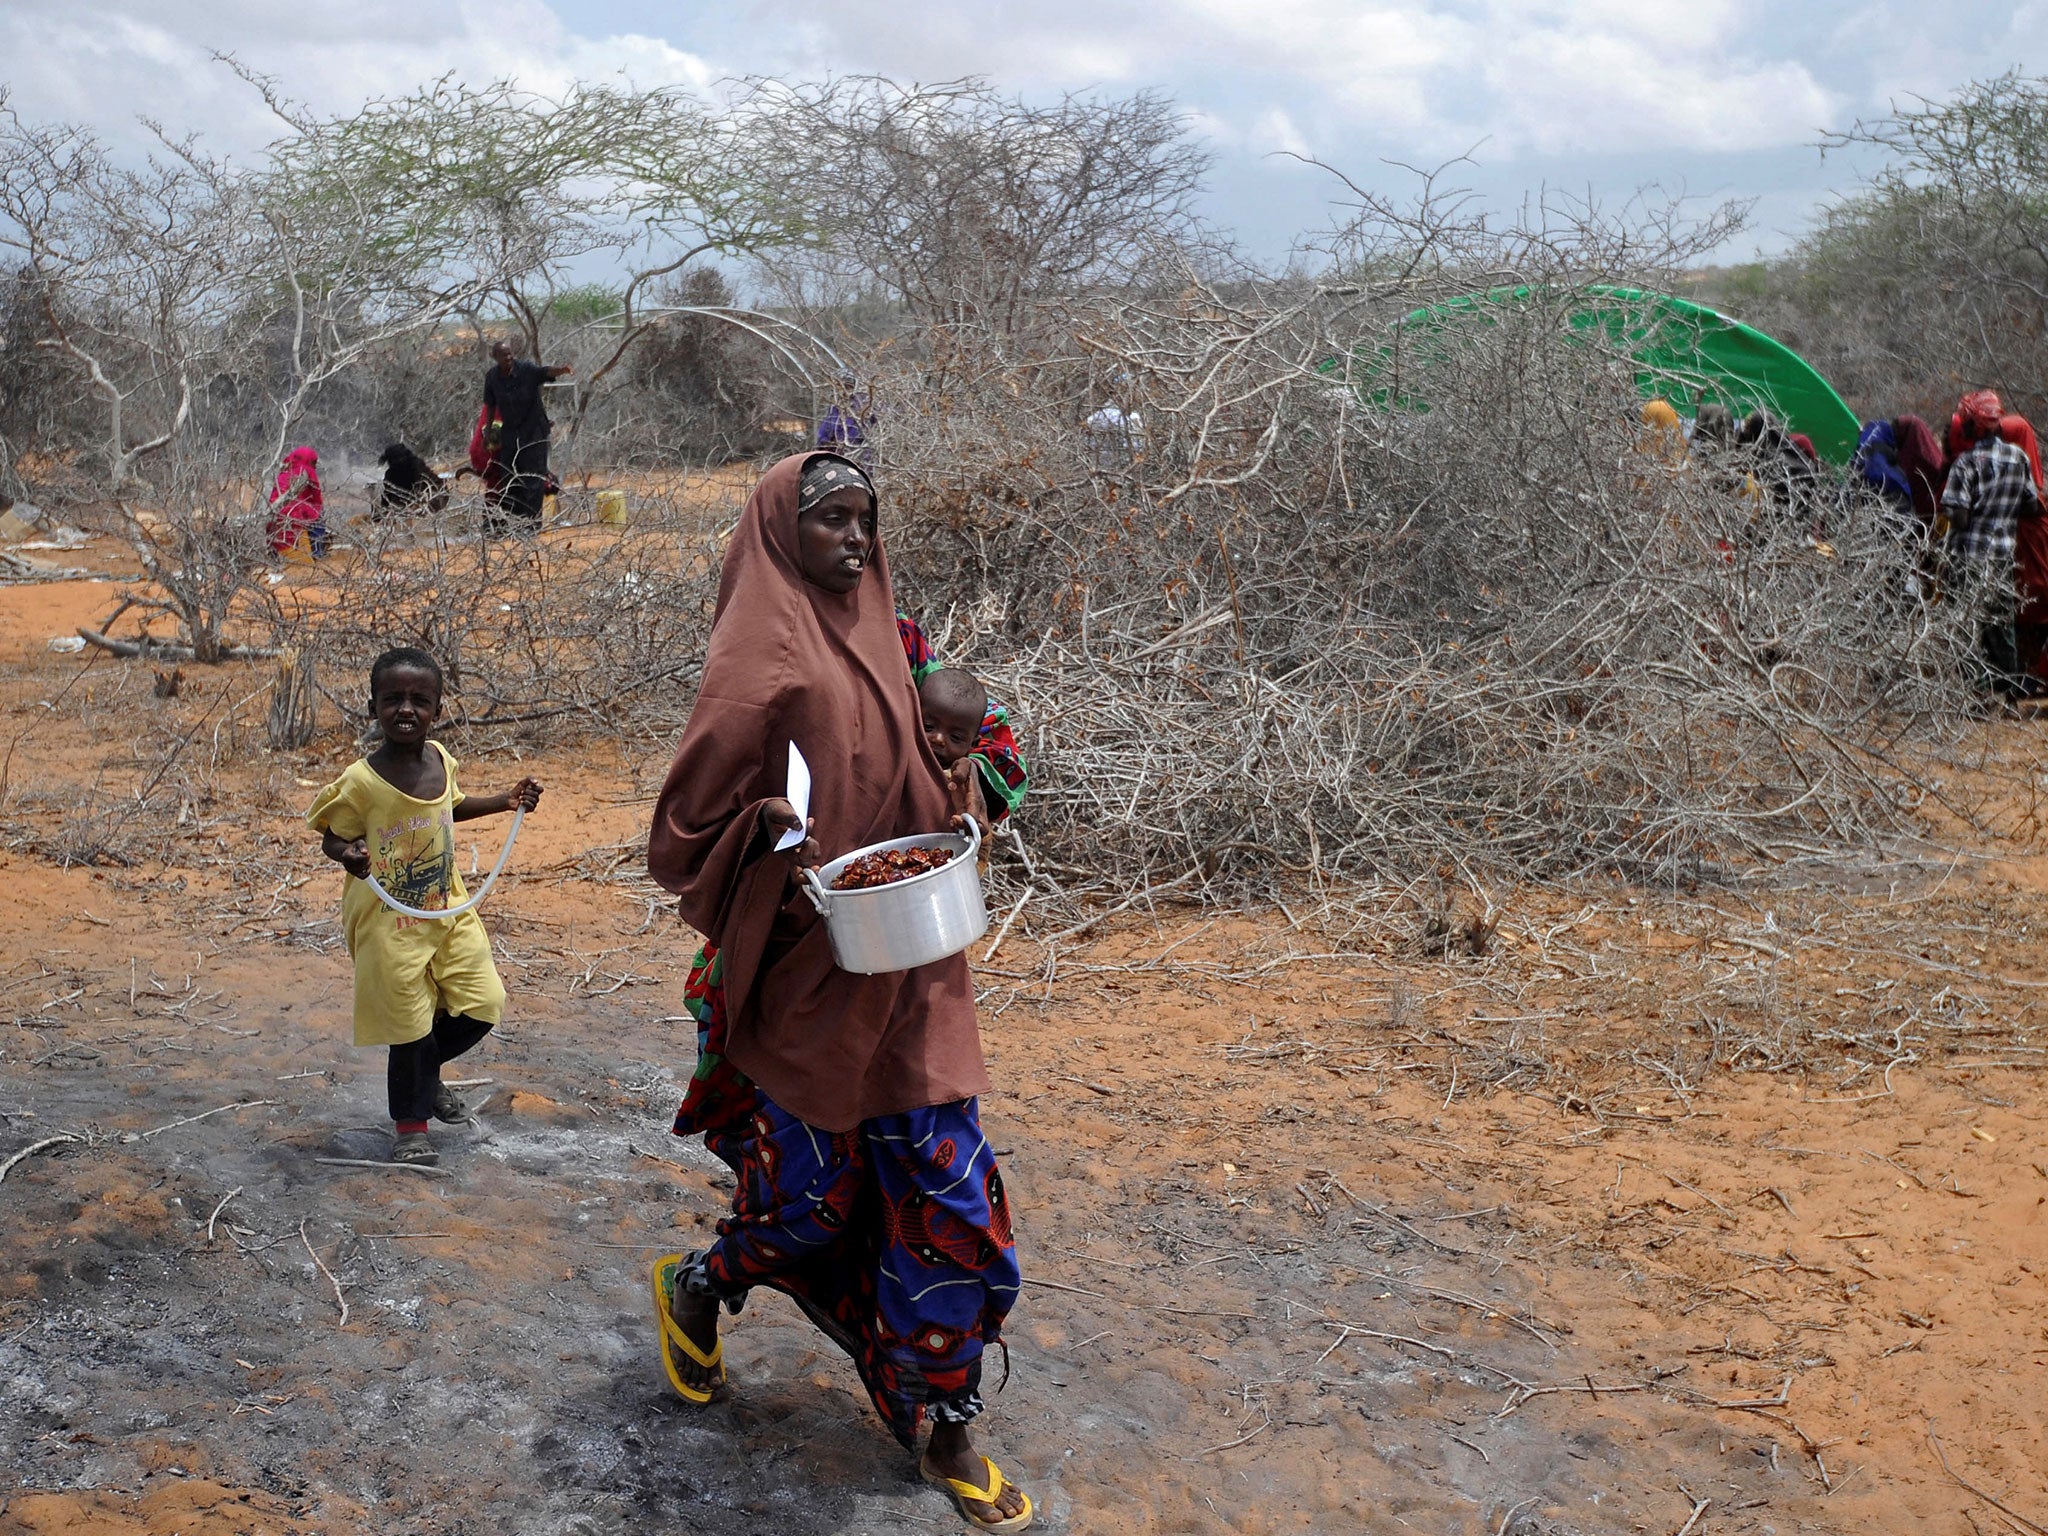 Somalia, a Horn of Africa country of 12 million people, is facing its third famine in 25 years of civil war and anarchy